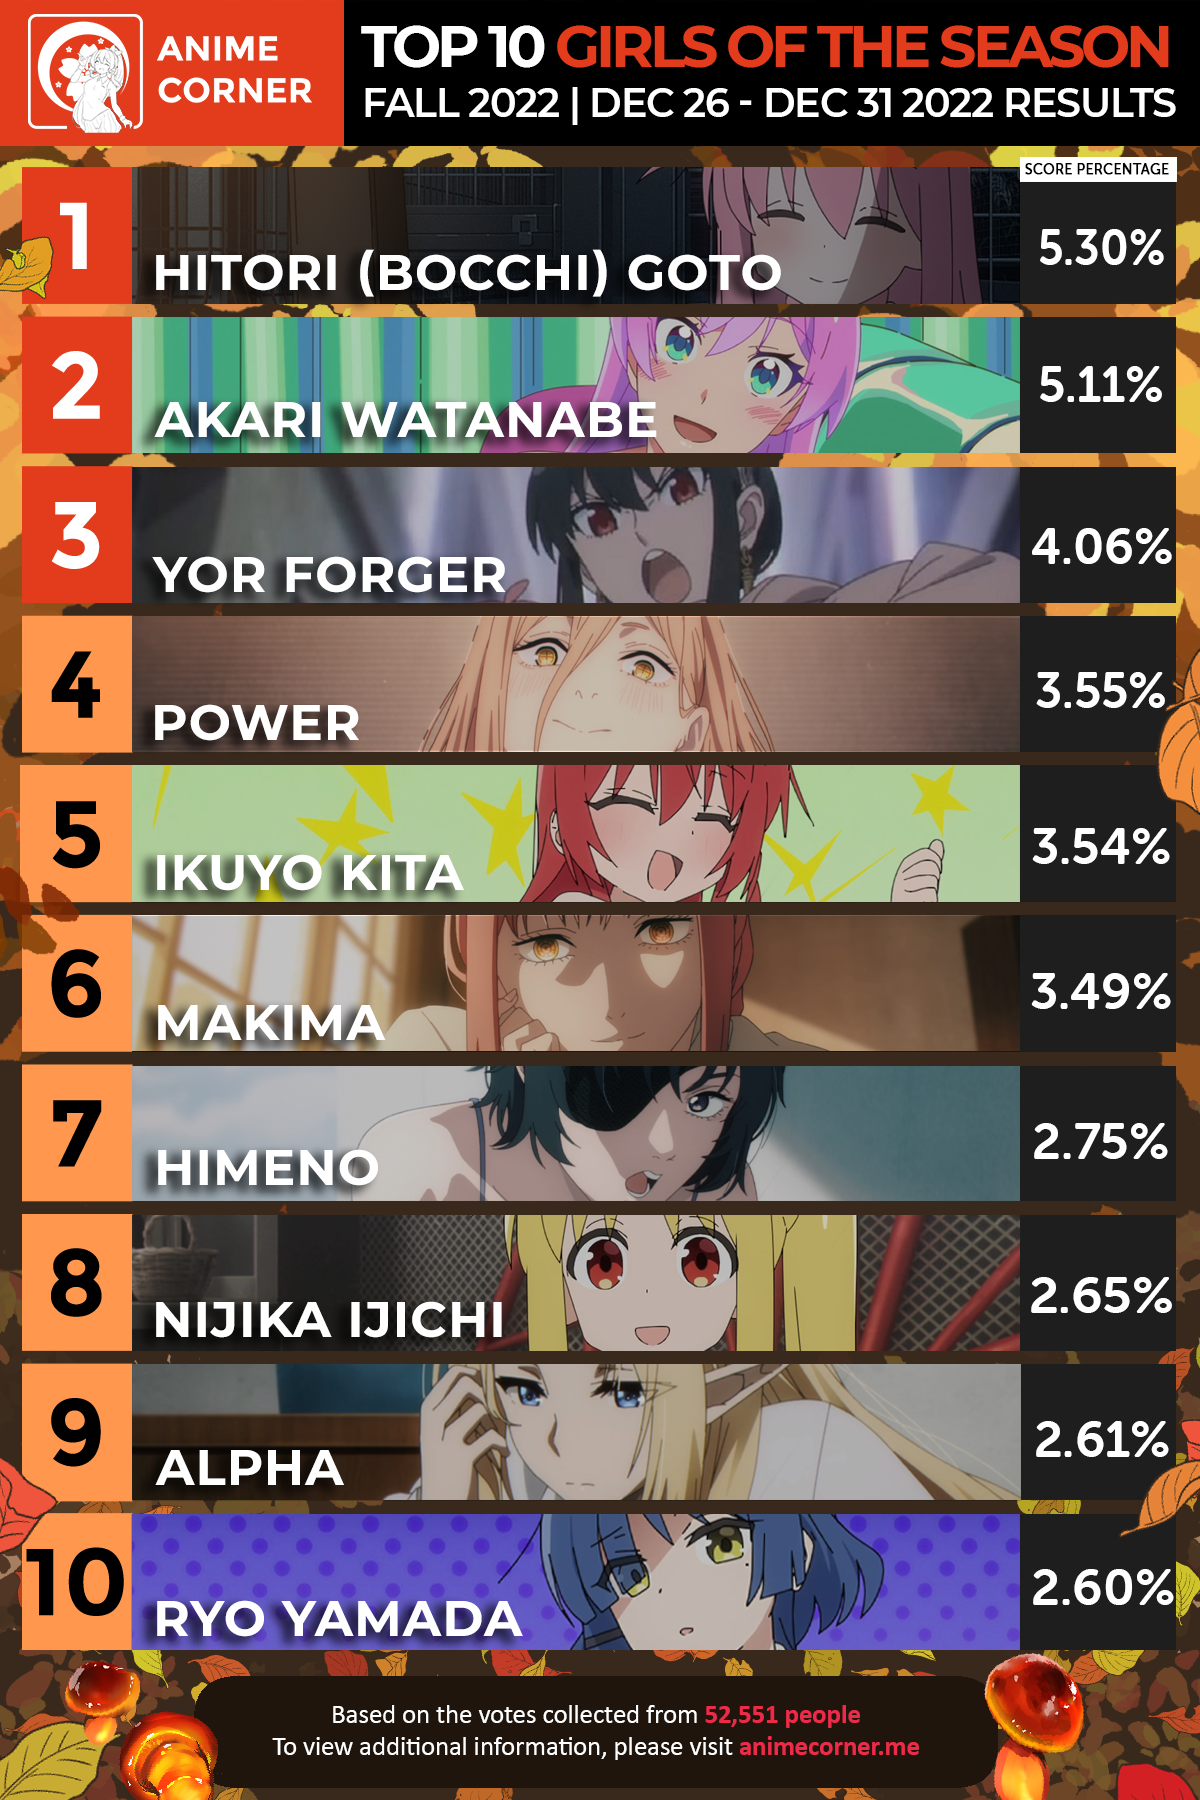 Anime Trending - Vote for next week's top 10 girls: atani.me/fgirl7 Here  are your TOP 10 FEMALE CHARACTERS for Week #6 of the Fall 2022 Anime  Season! Hitori Gotou (Bocchi the Rock)